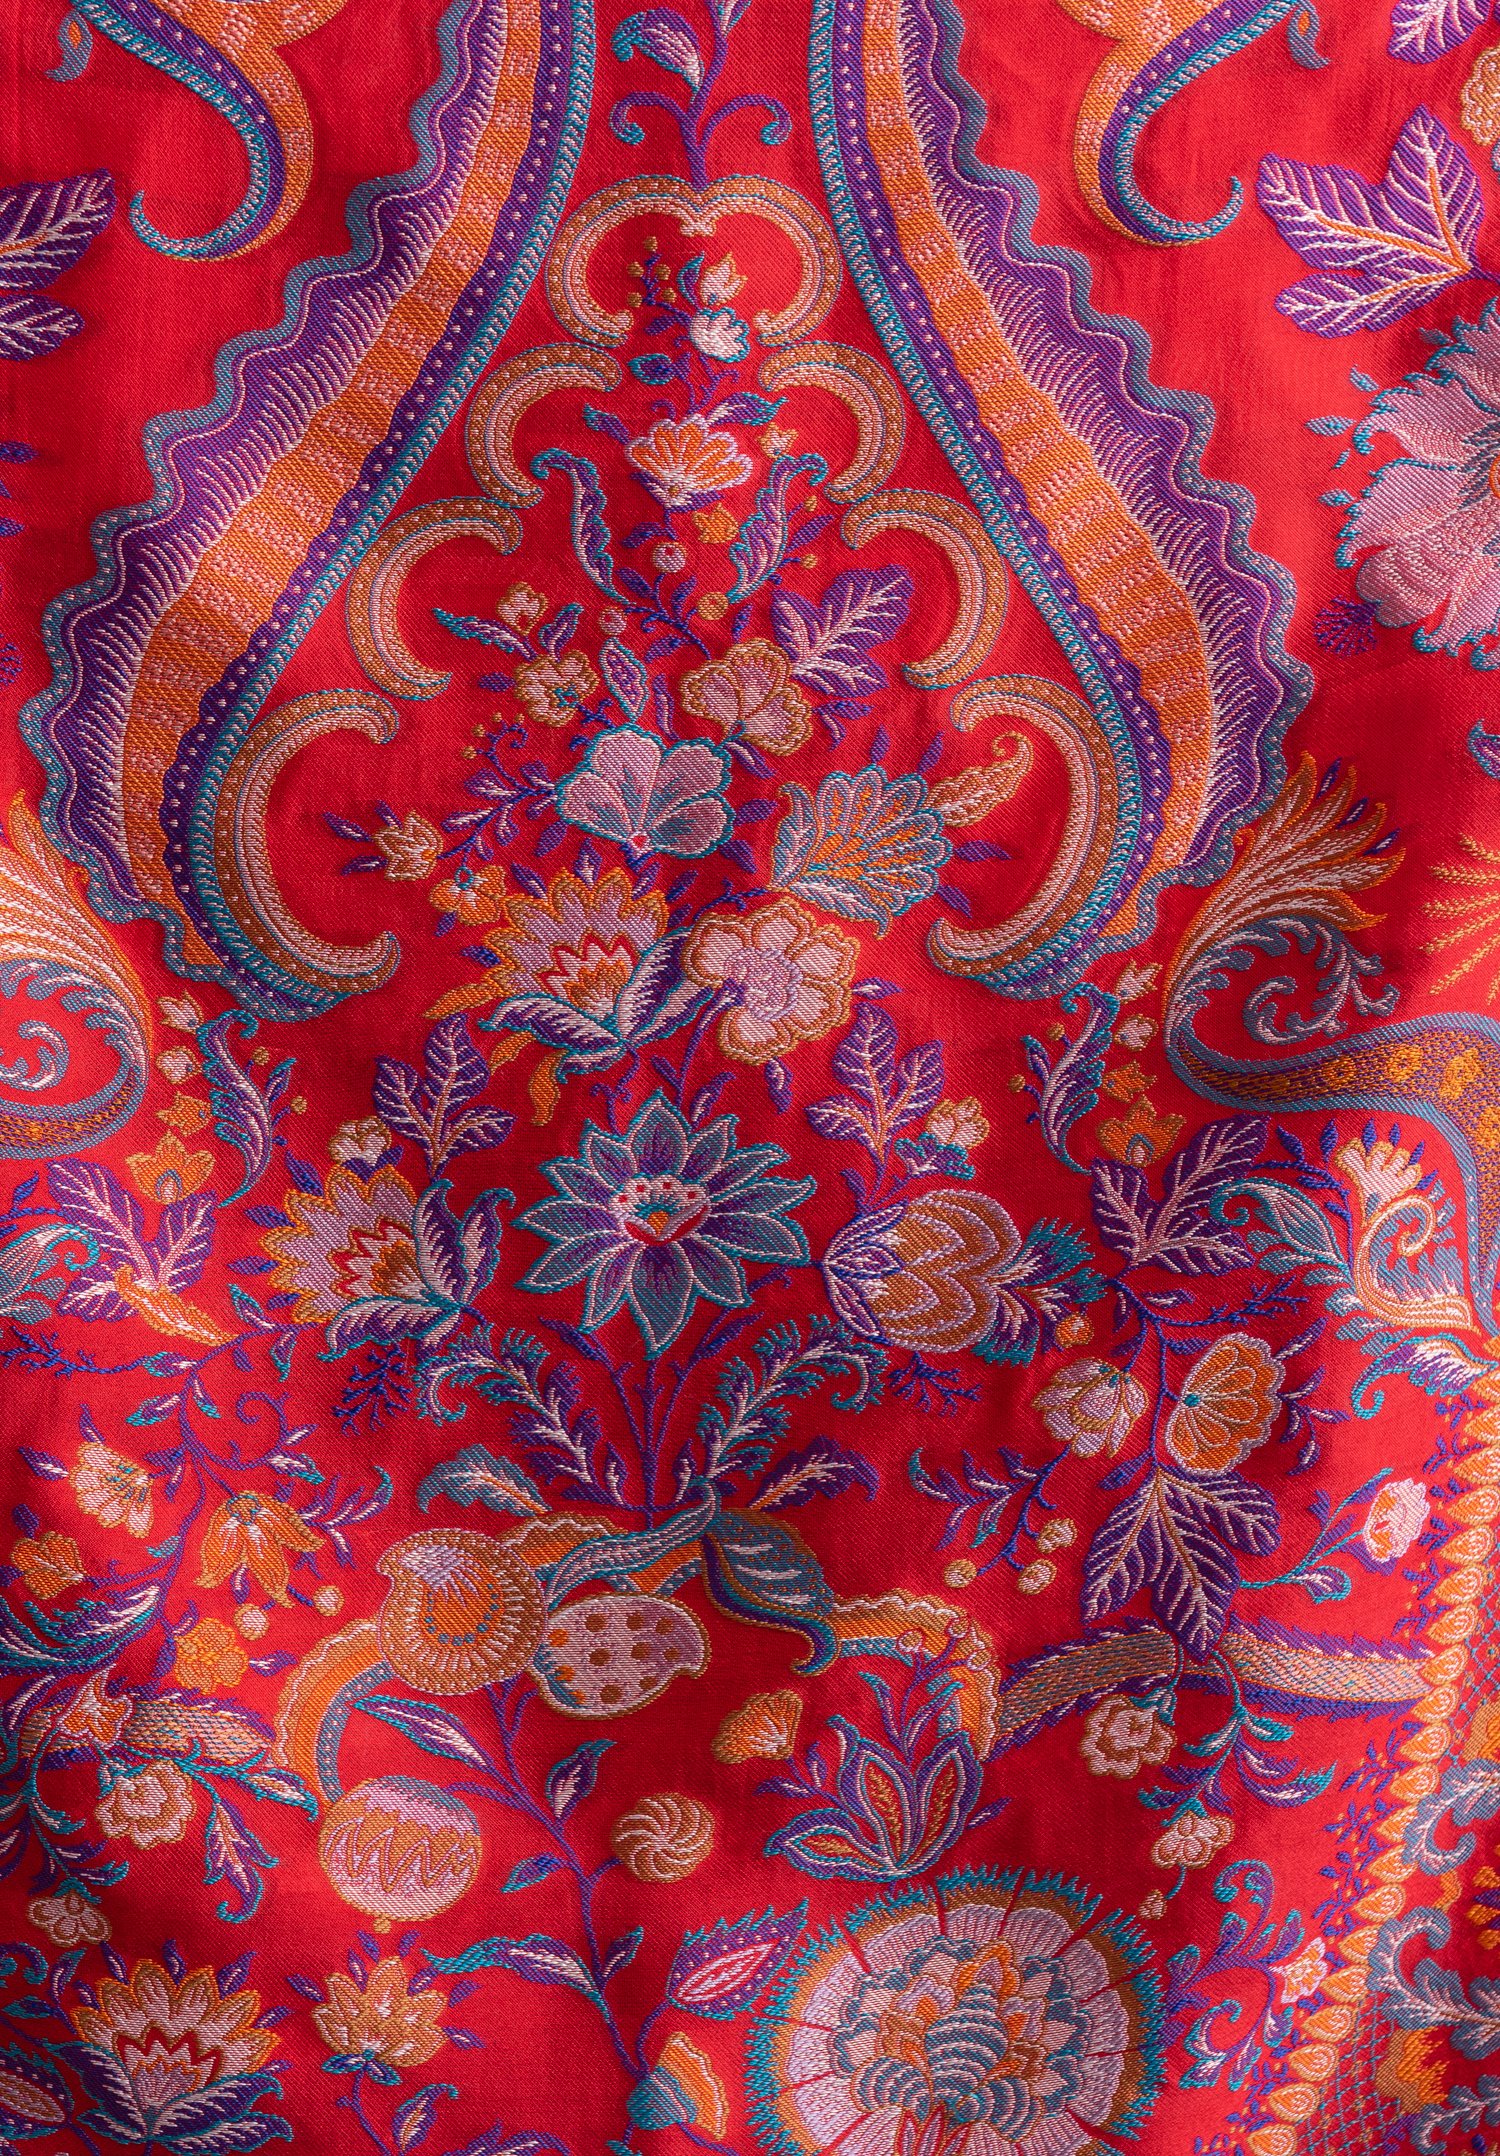 Etro Ornate Floral Pattern Scarf in Red / Multi | Santa Fe Dry Goods ...